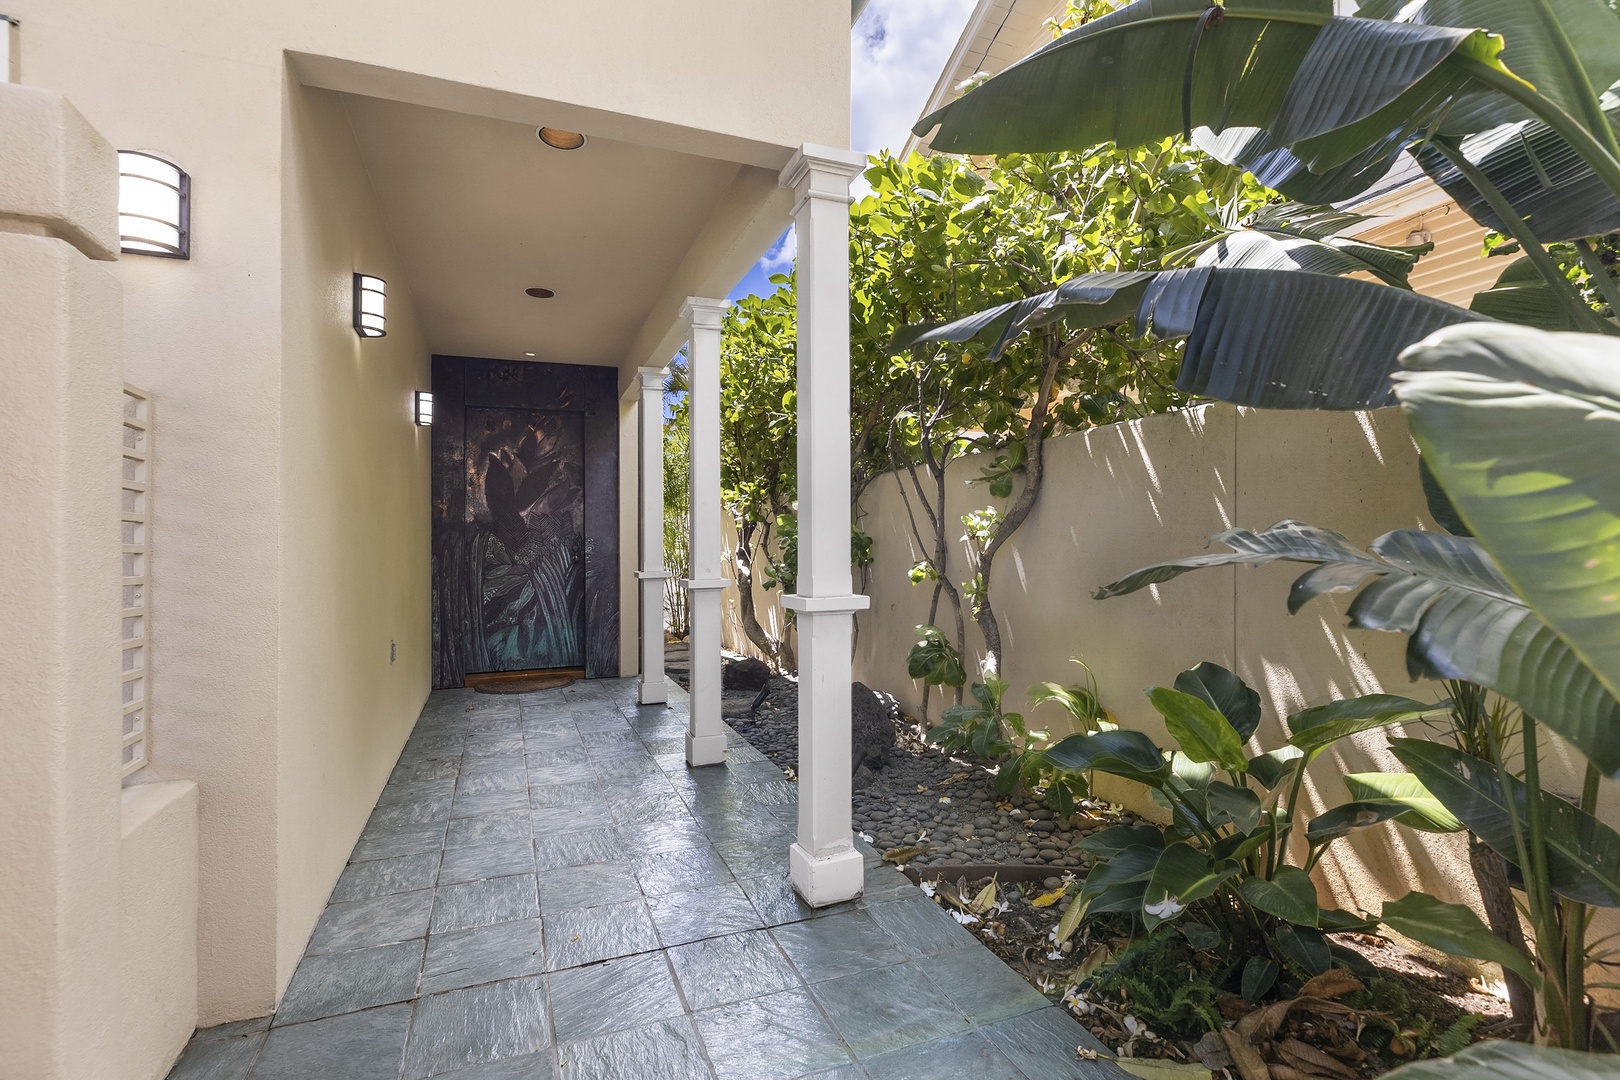 Honolulu Vacation Rentals, Diamond Head Surf House - Covered walk way leads to engraved floral entry door.